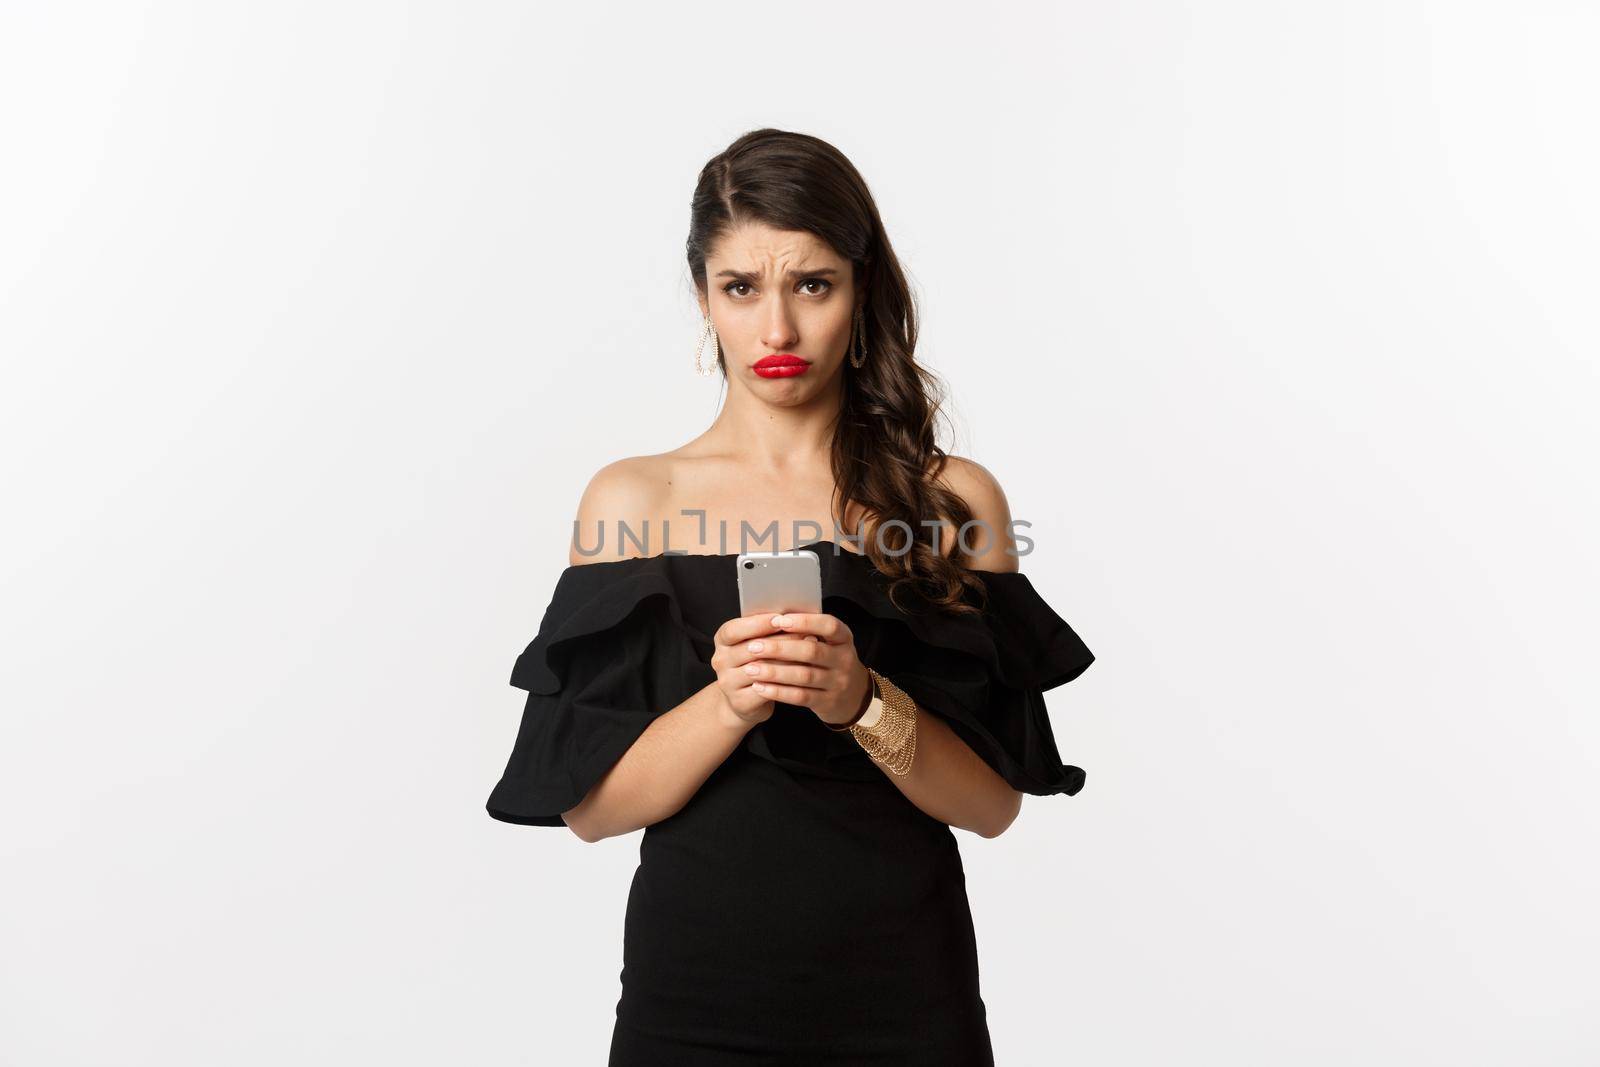 Sad and gloomy woman in black dress, sulking upset, using mobile phone and feeling disappointed, standing over white background.